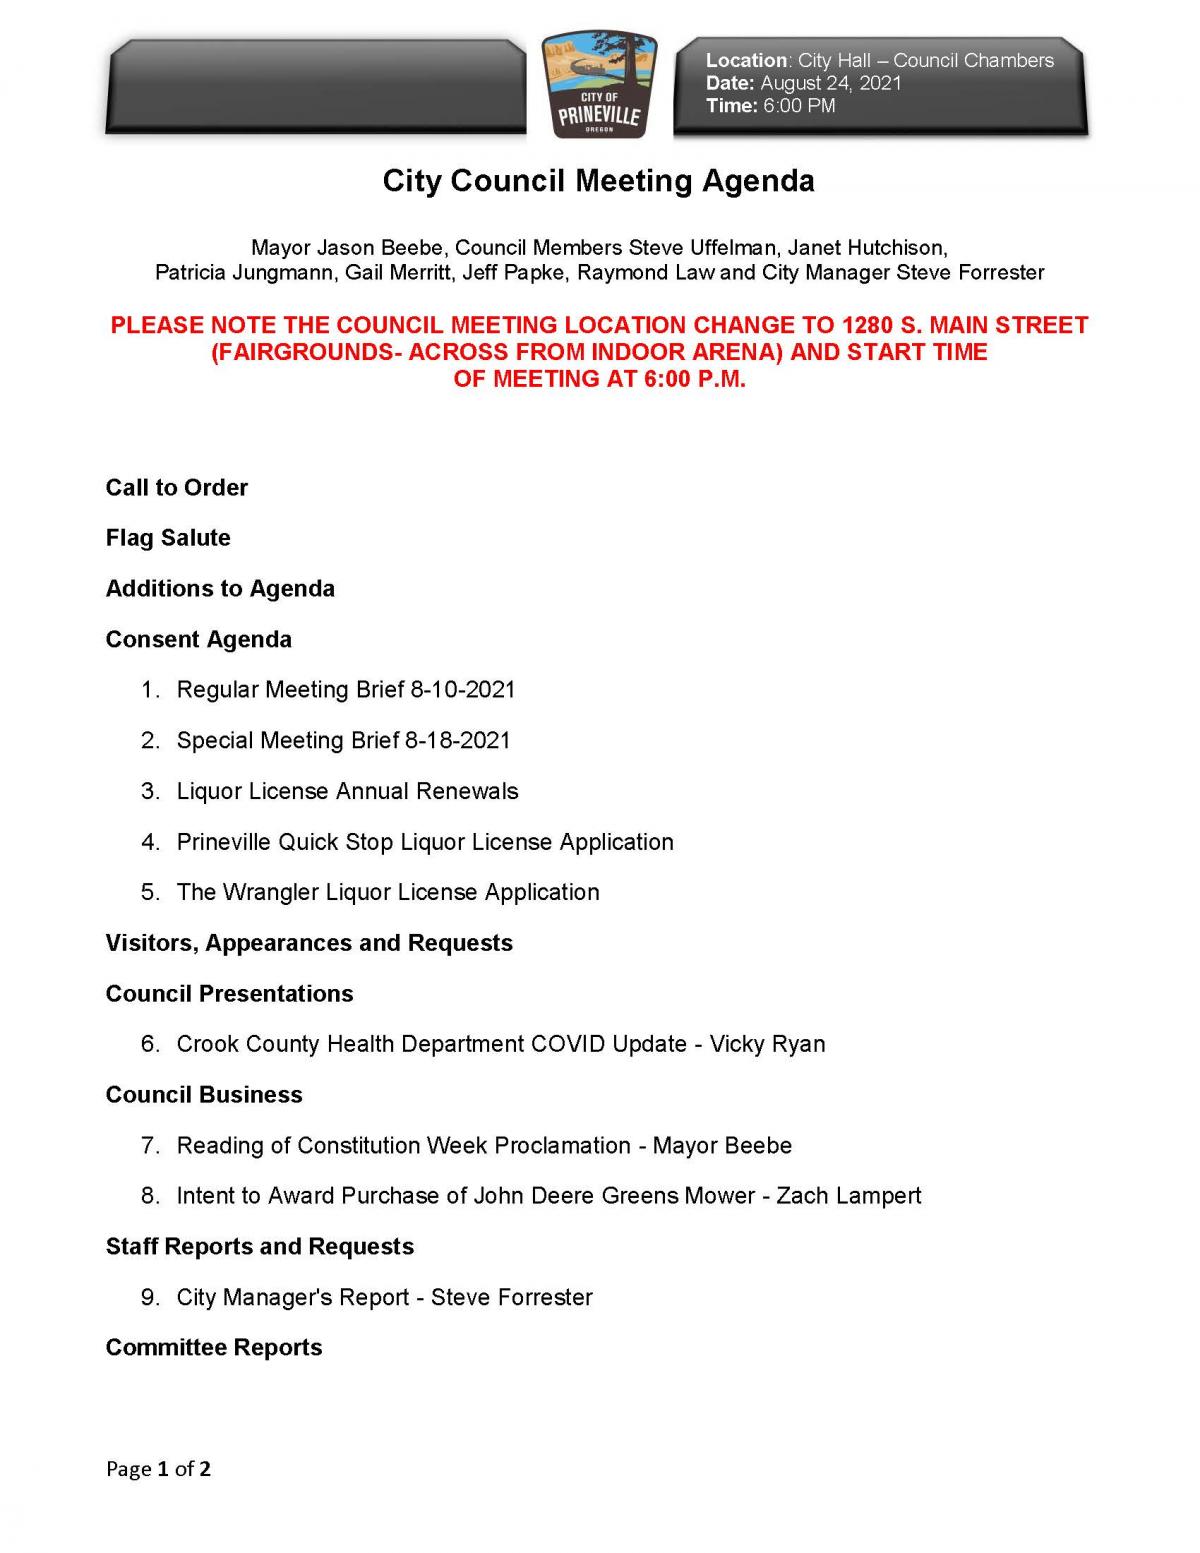 City Council Meeting | City of Prineville Oregon